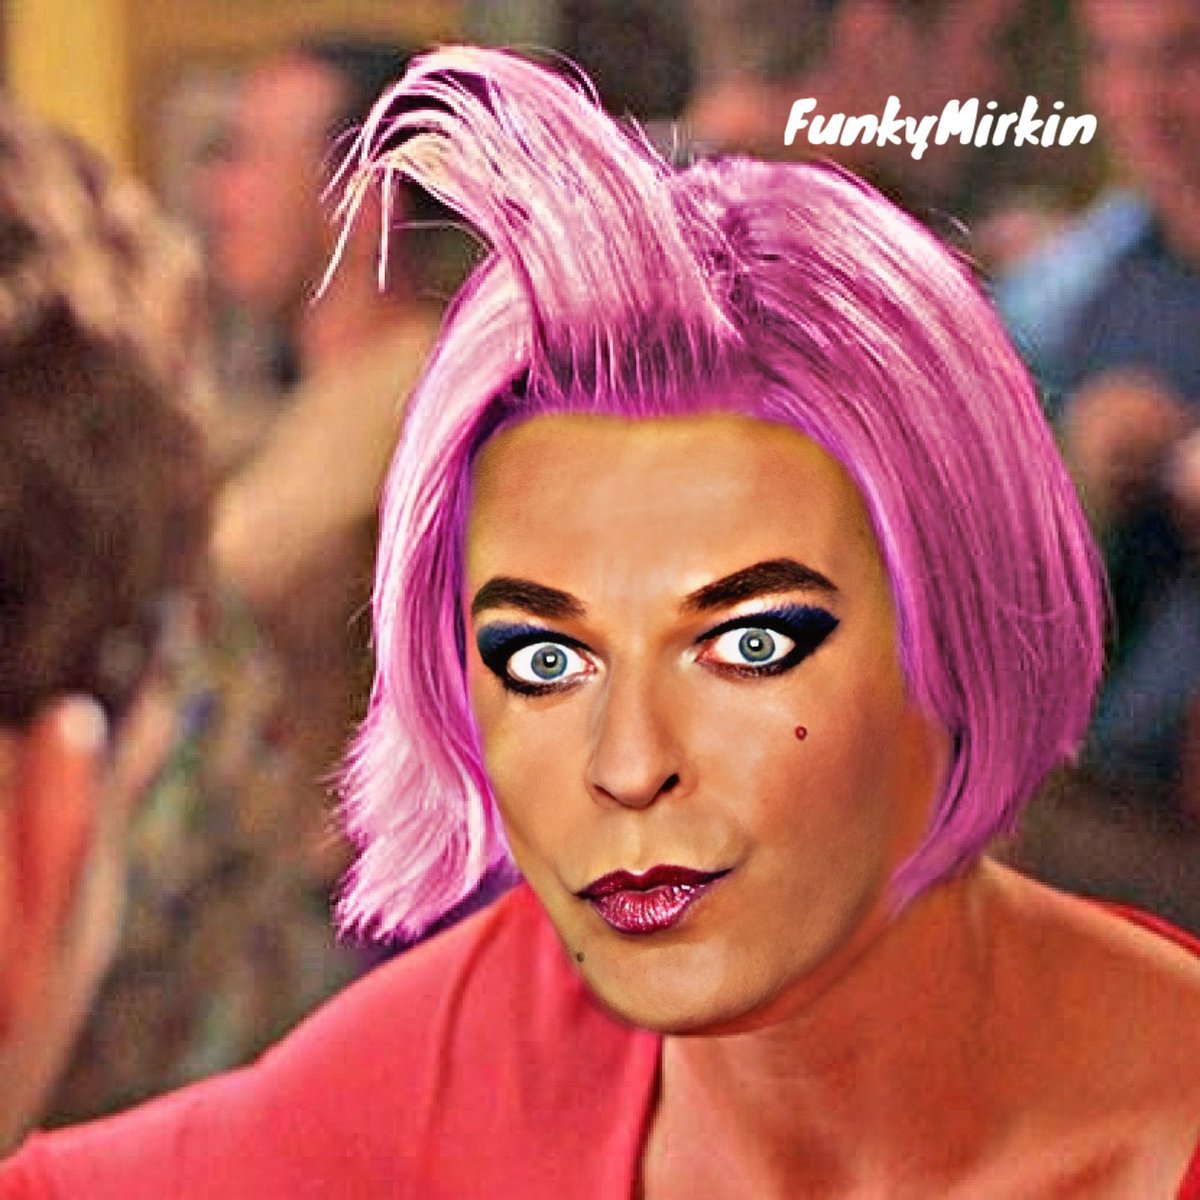 One of my faves that I have made. There's Something About Clary. #Photoshop #PhotoVandal #FunkyMirkin #TheresSomethingAboutMary #JulianClary